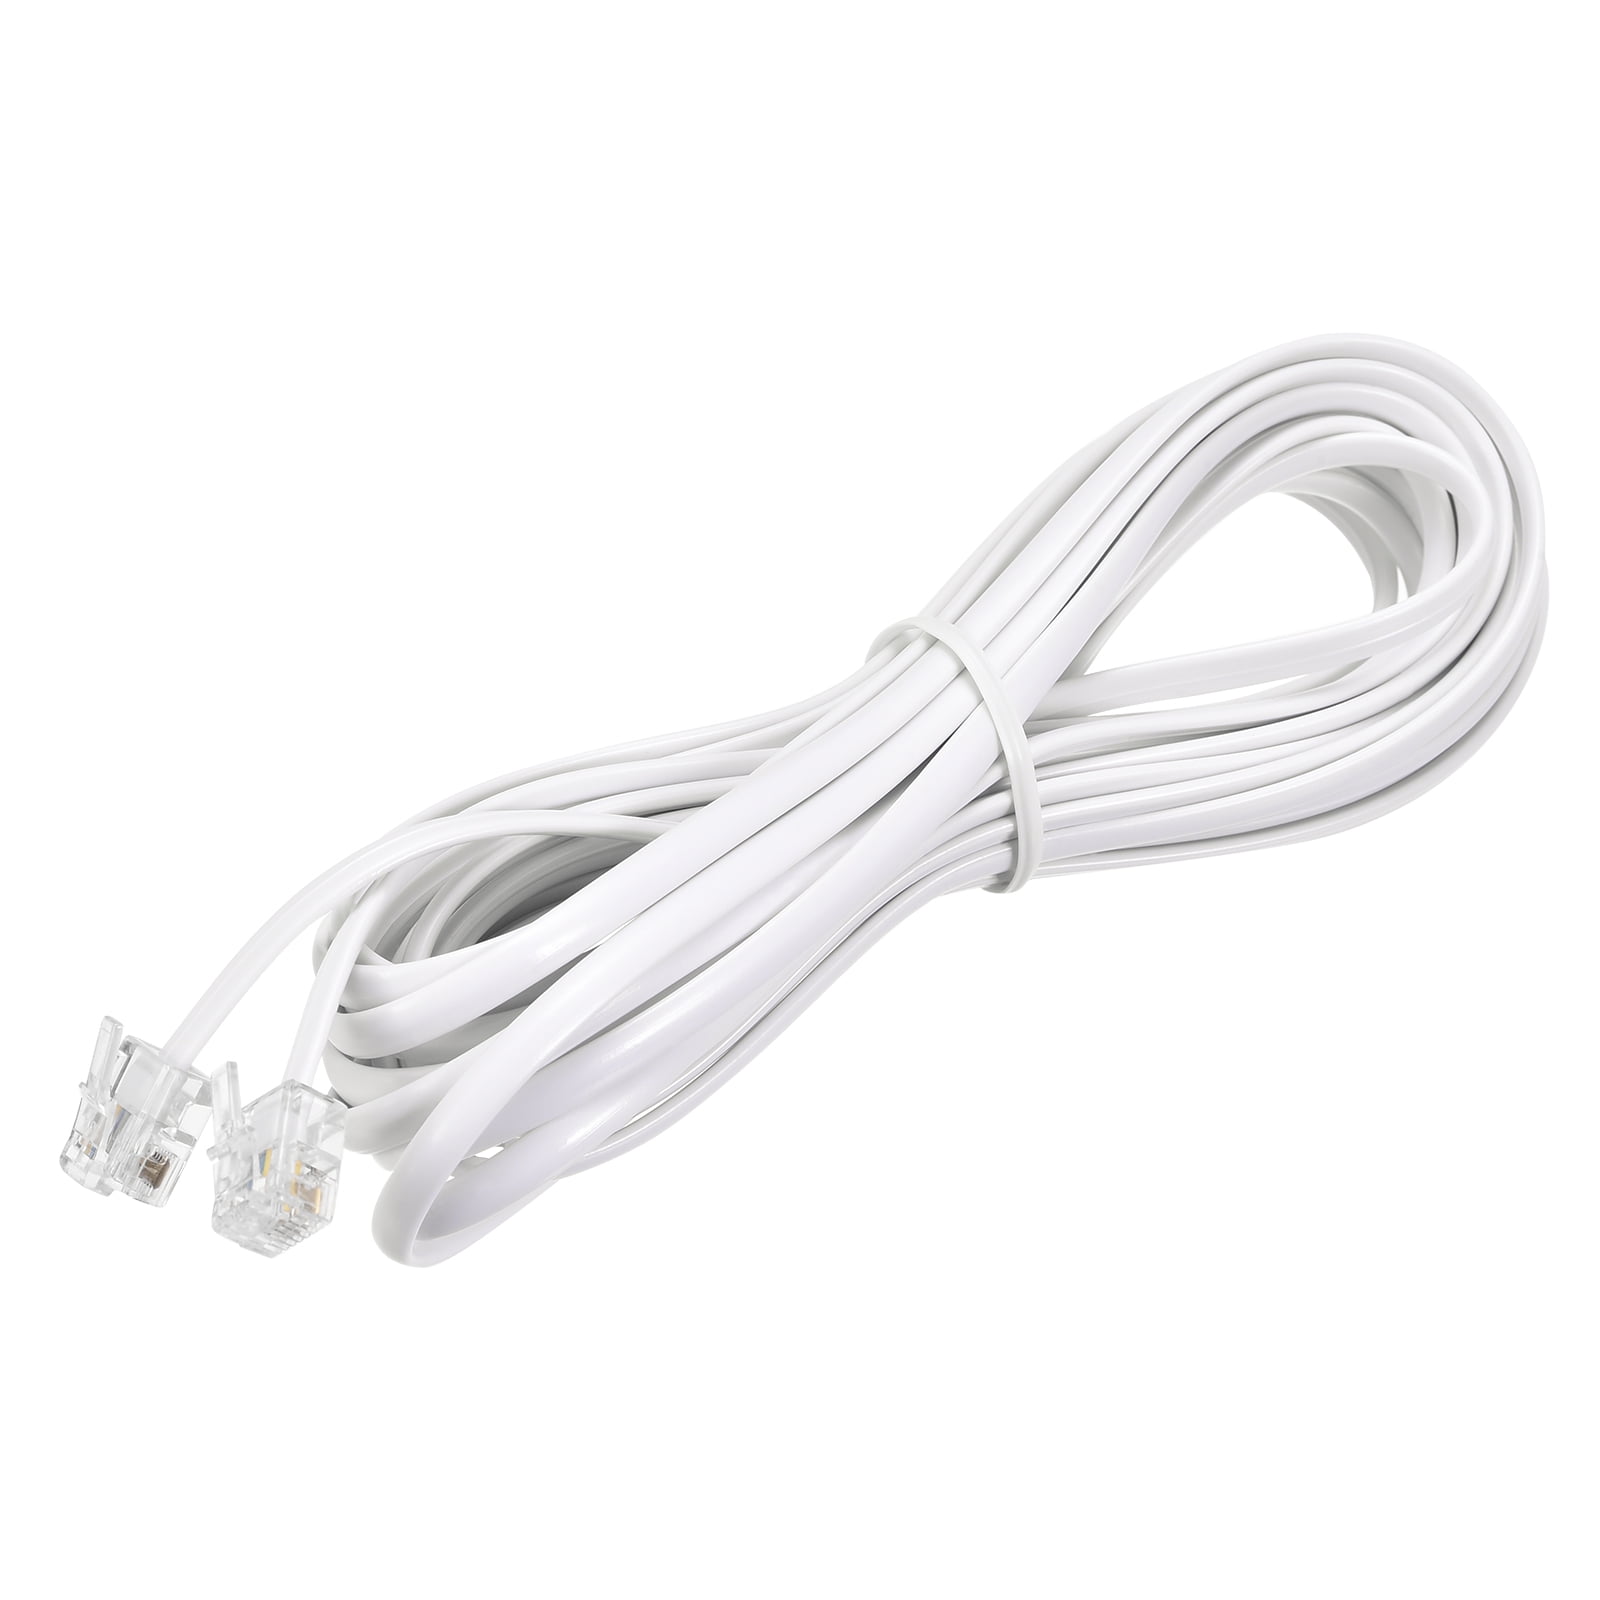 NEORTX RJ11 to RJ11 Cable 5ft, 1.5 Meters Phone Cord Telephone Line  Extension Cord Cable Wire Male to Male RJ11 6P4C Modular Plug for Landline